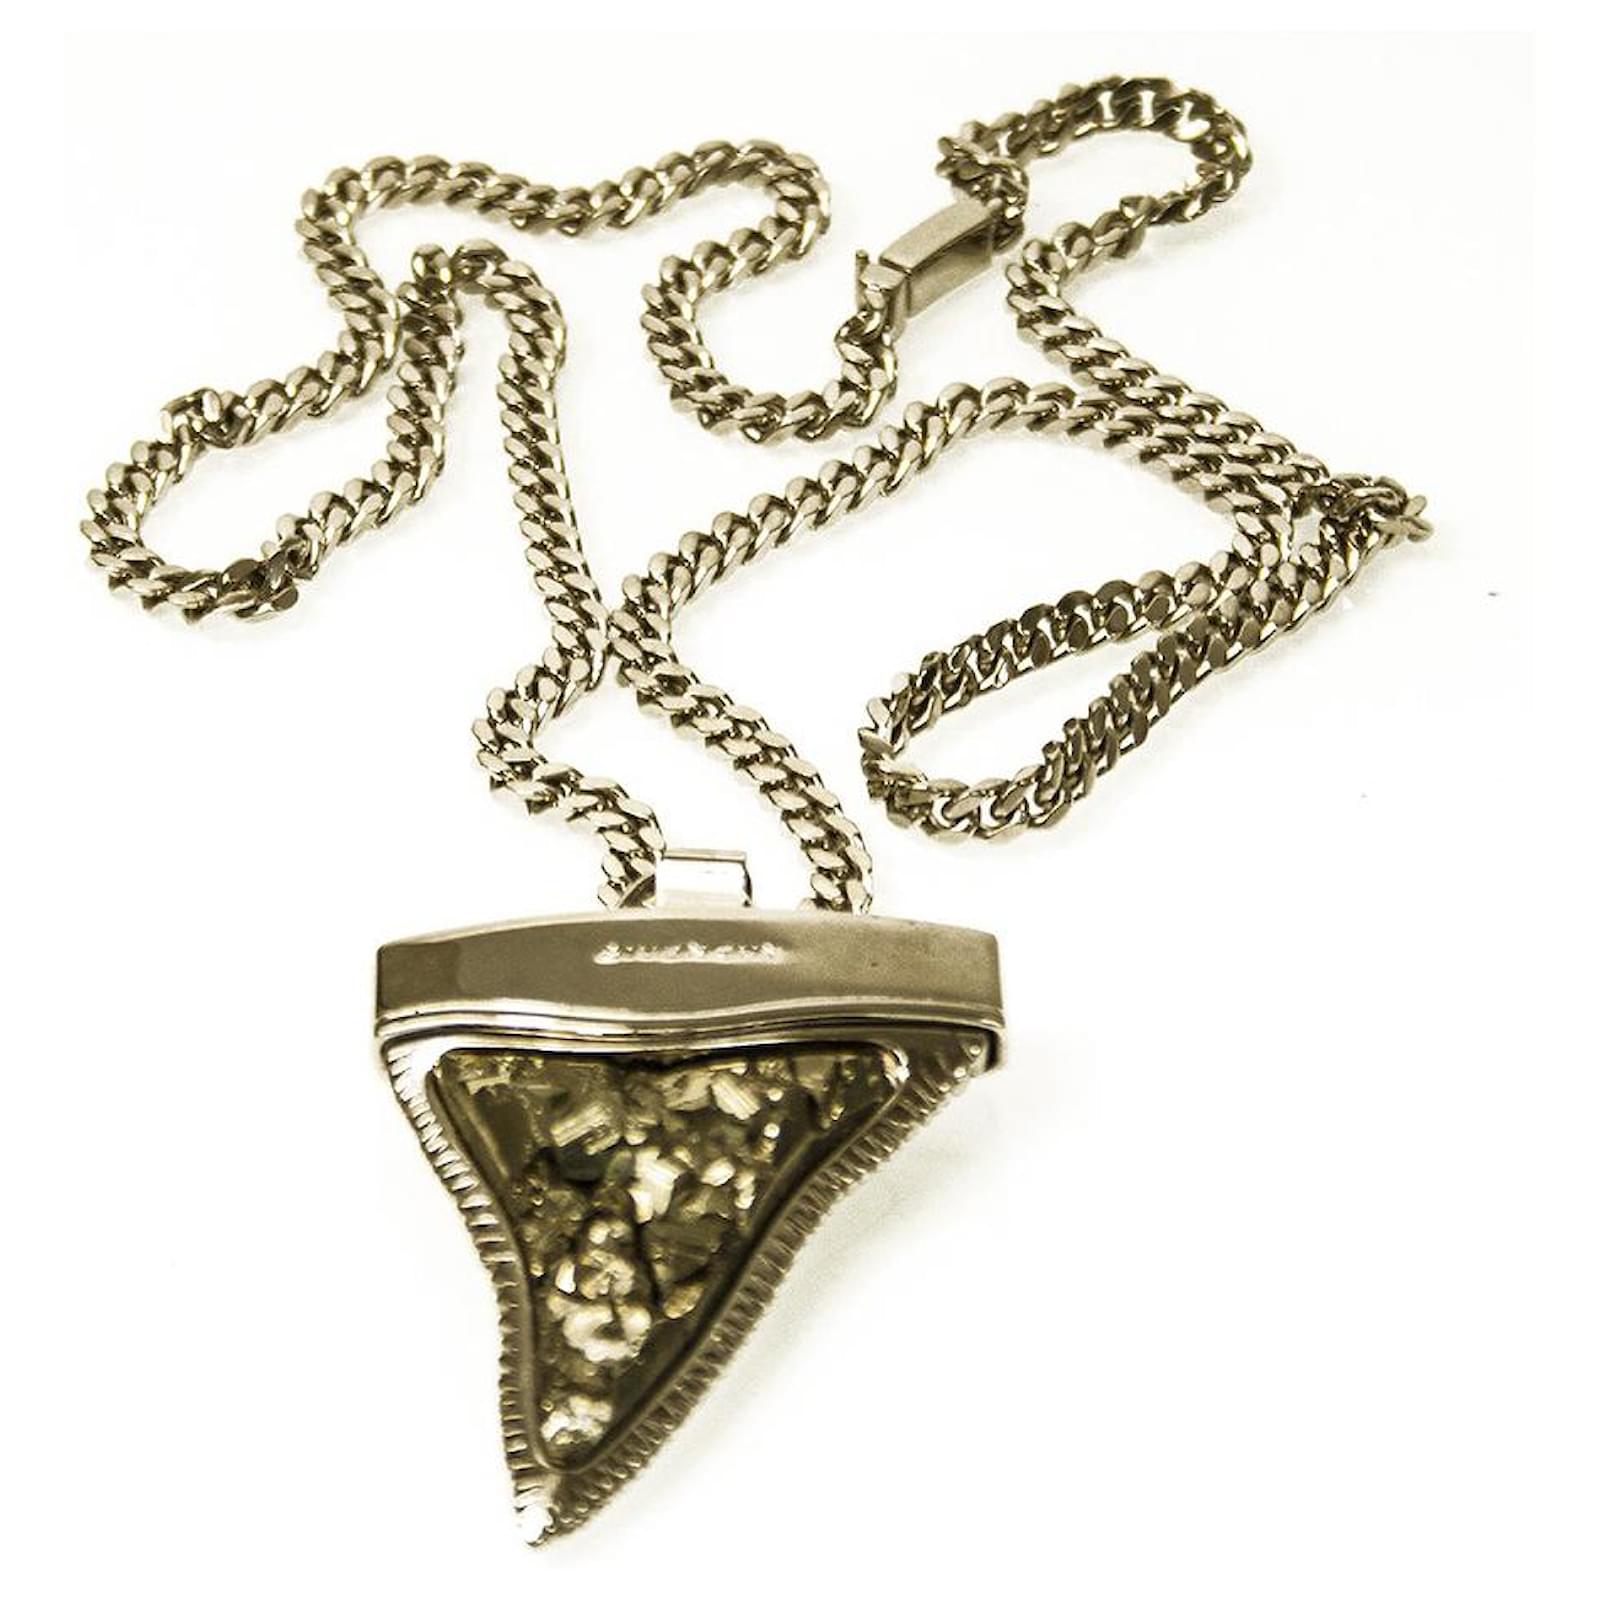 Givenchy Silver Crystal 4G Lock Necklace Givenchy